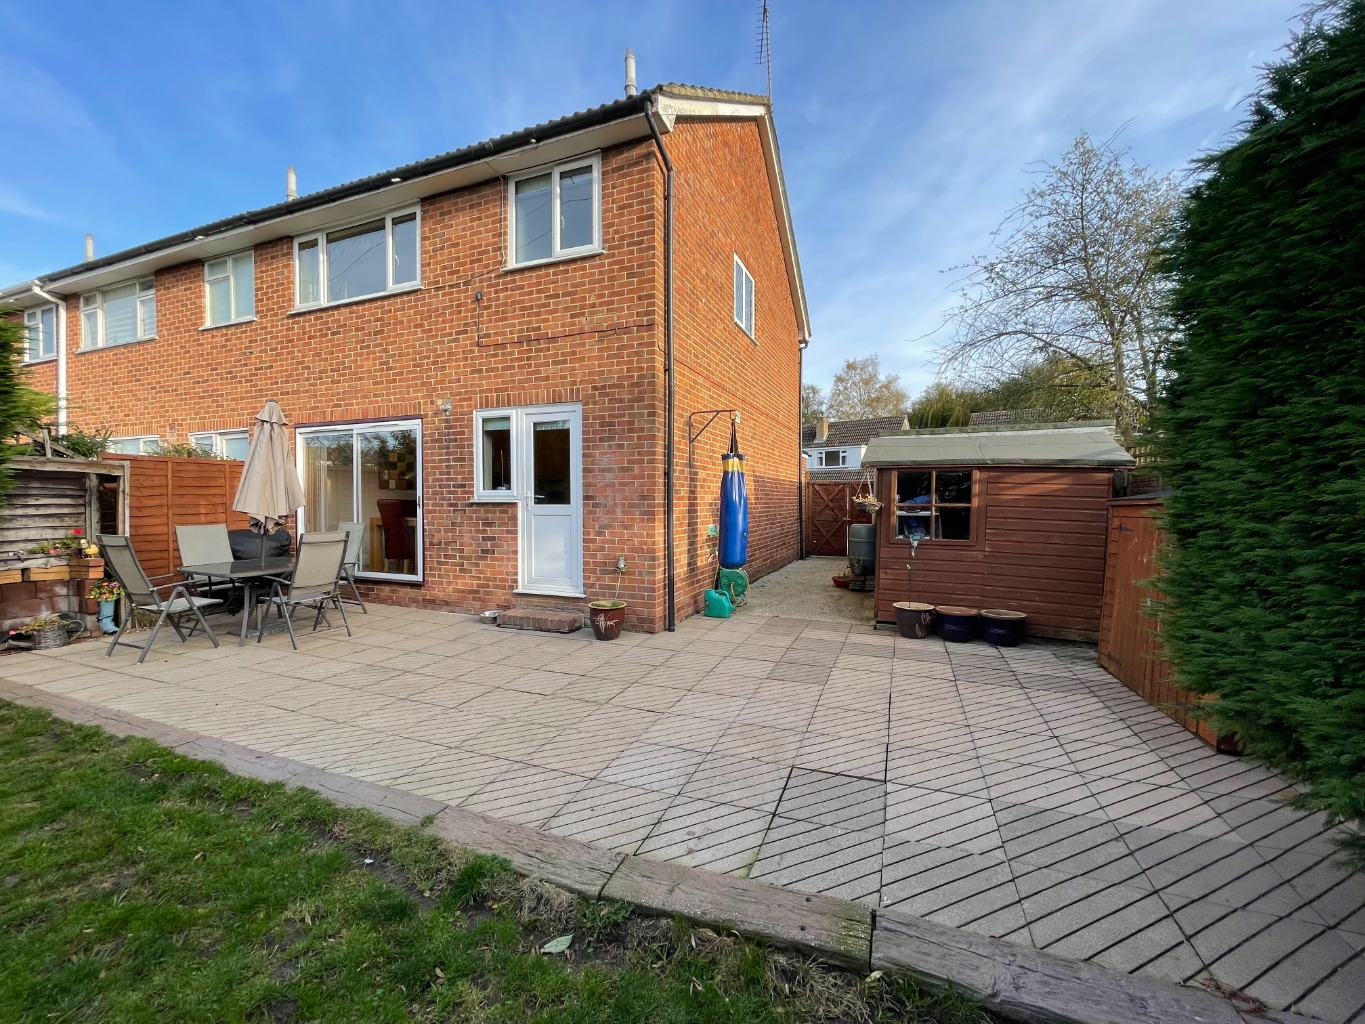 Are you looking for a three bedroom home with HUGE POTENTIAL TO EXTEND? This could be the house for you! Check out my promo video which shows you the opportunity available, rarely seen in Woodley.